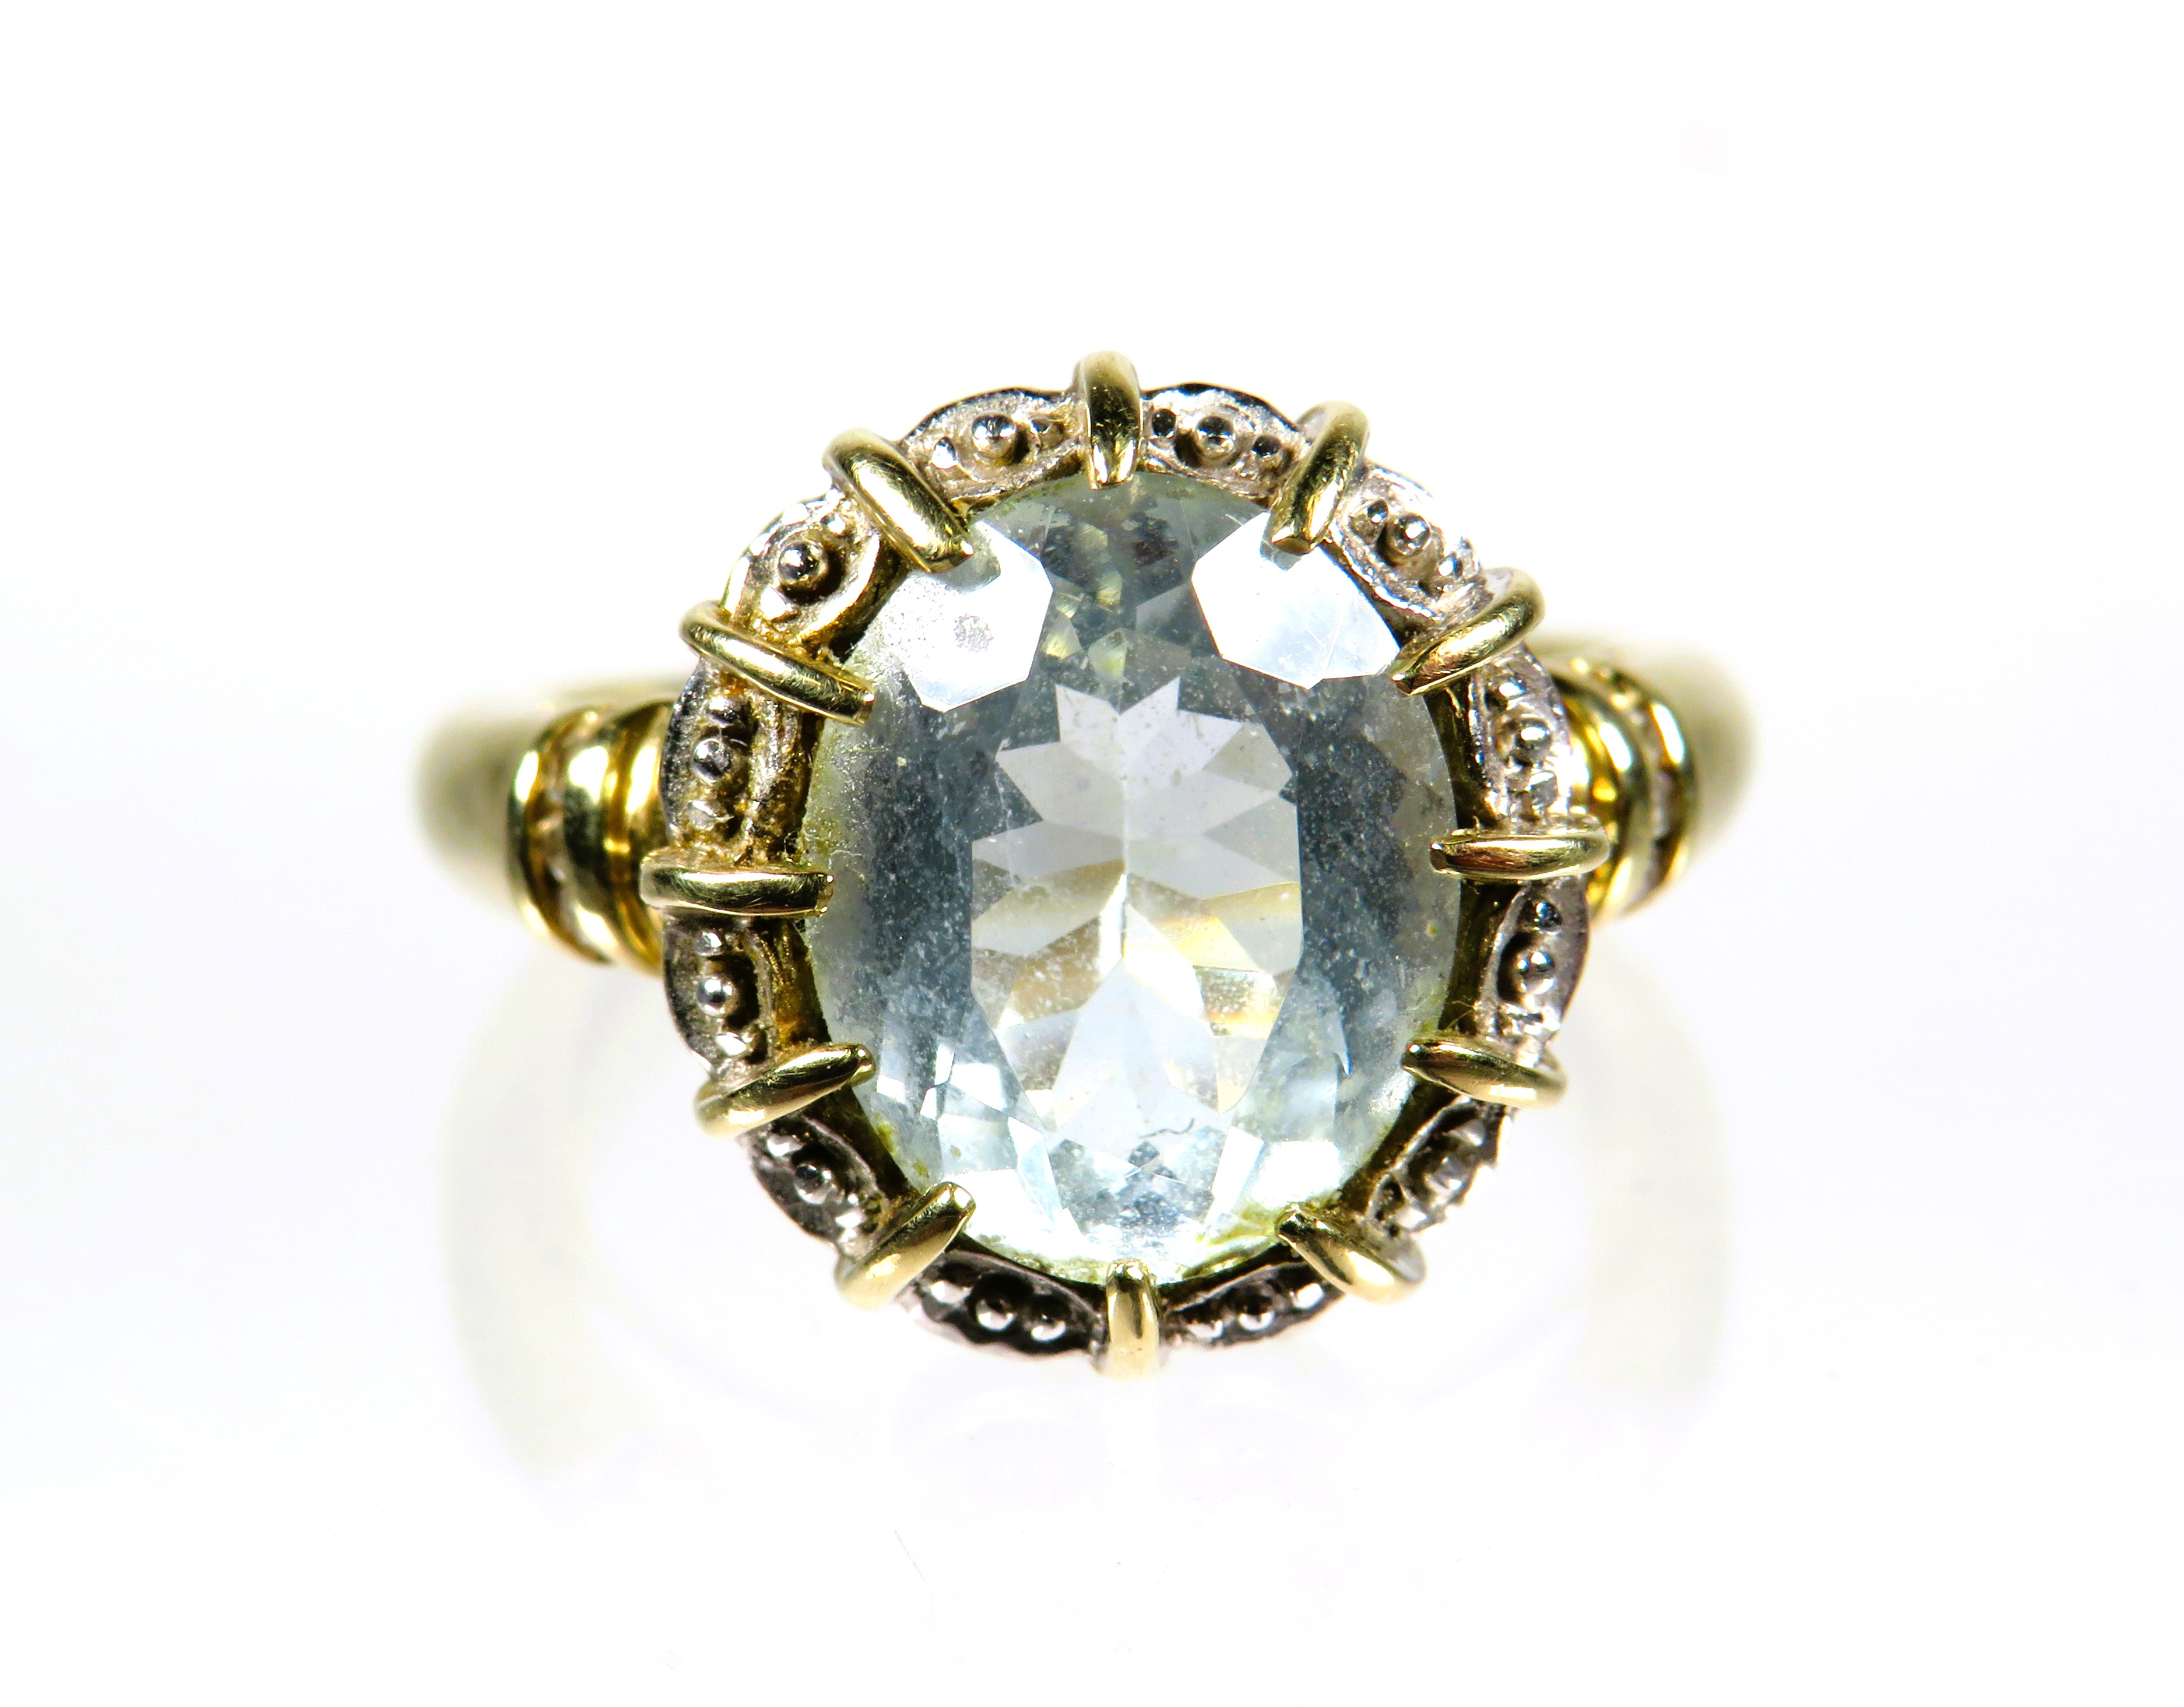 9ct Yellow Gold Ring set with a large Oval pale or White Topaz which measures approx 12 x 10mm. Fing